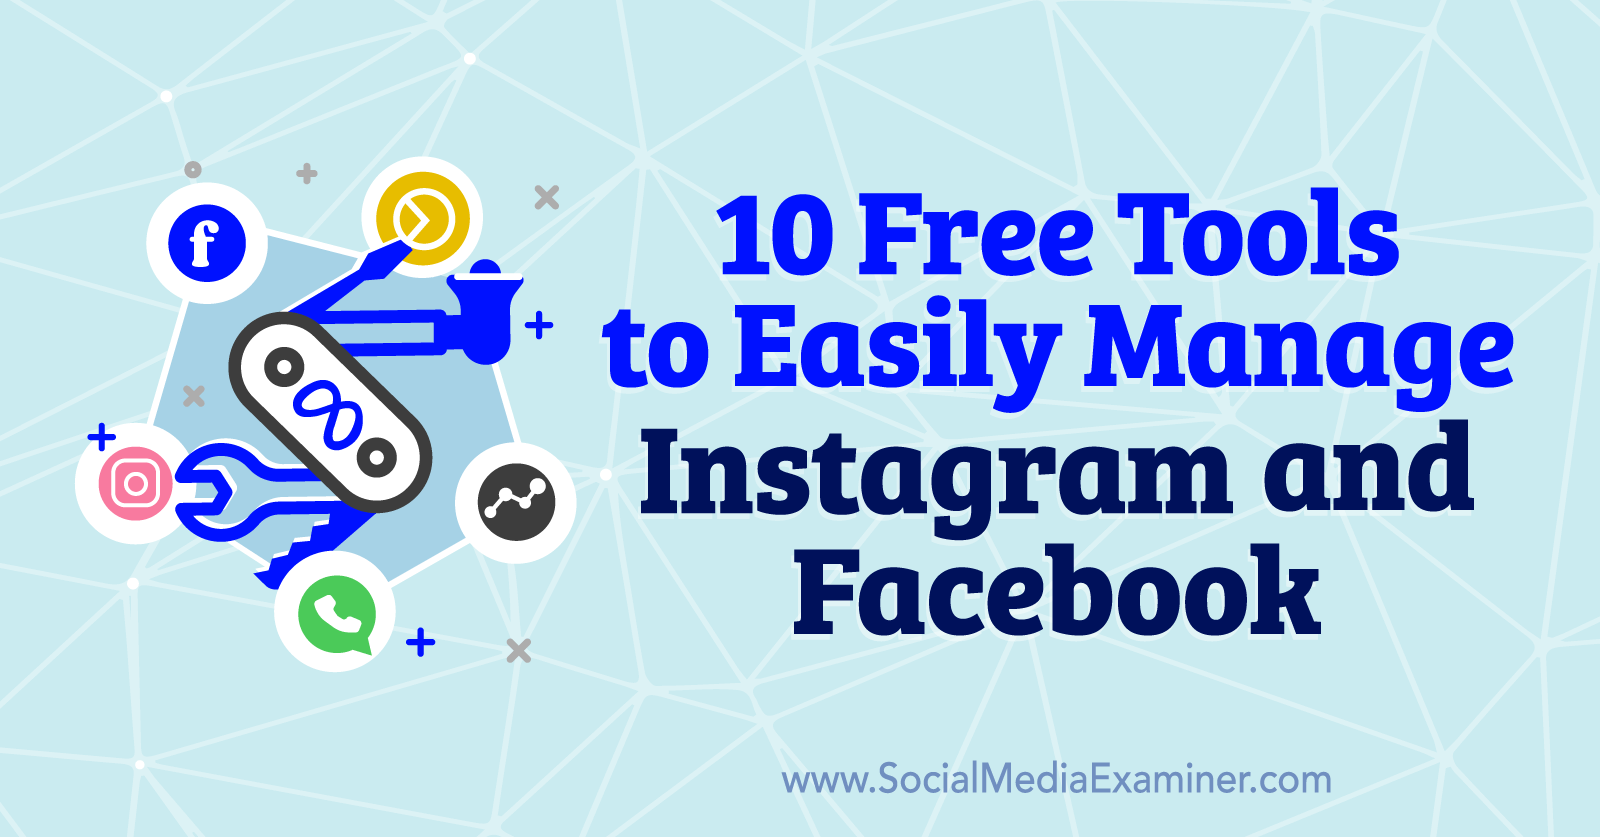 10 Free Tools to Easily Manage Instagram and Facebook-Social Media Examiner